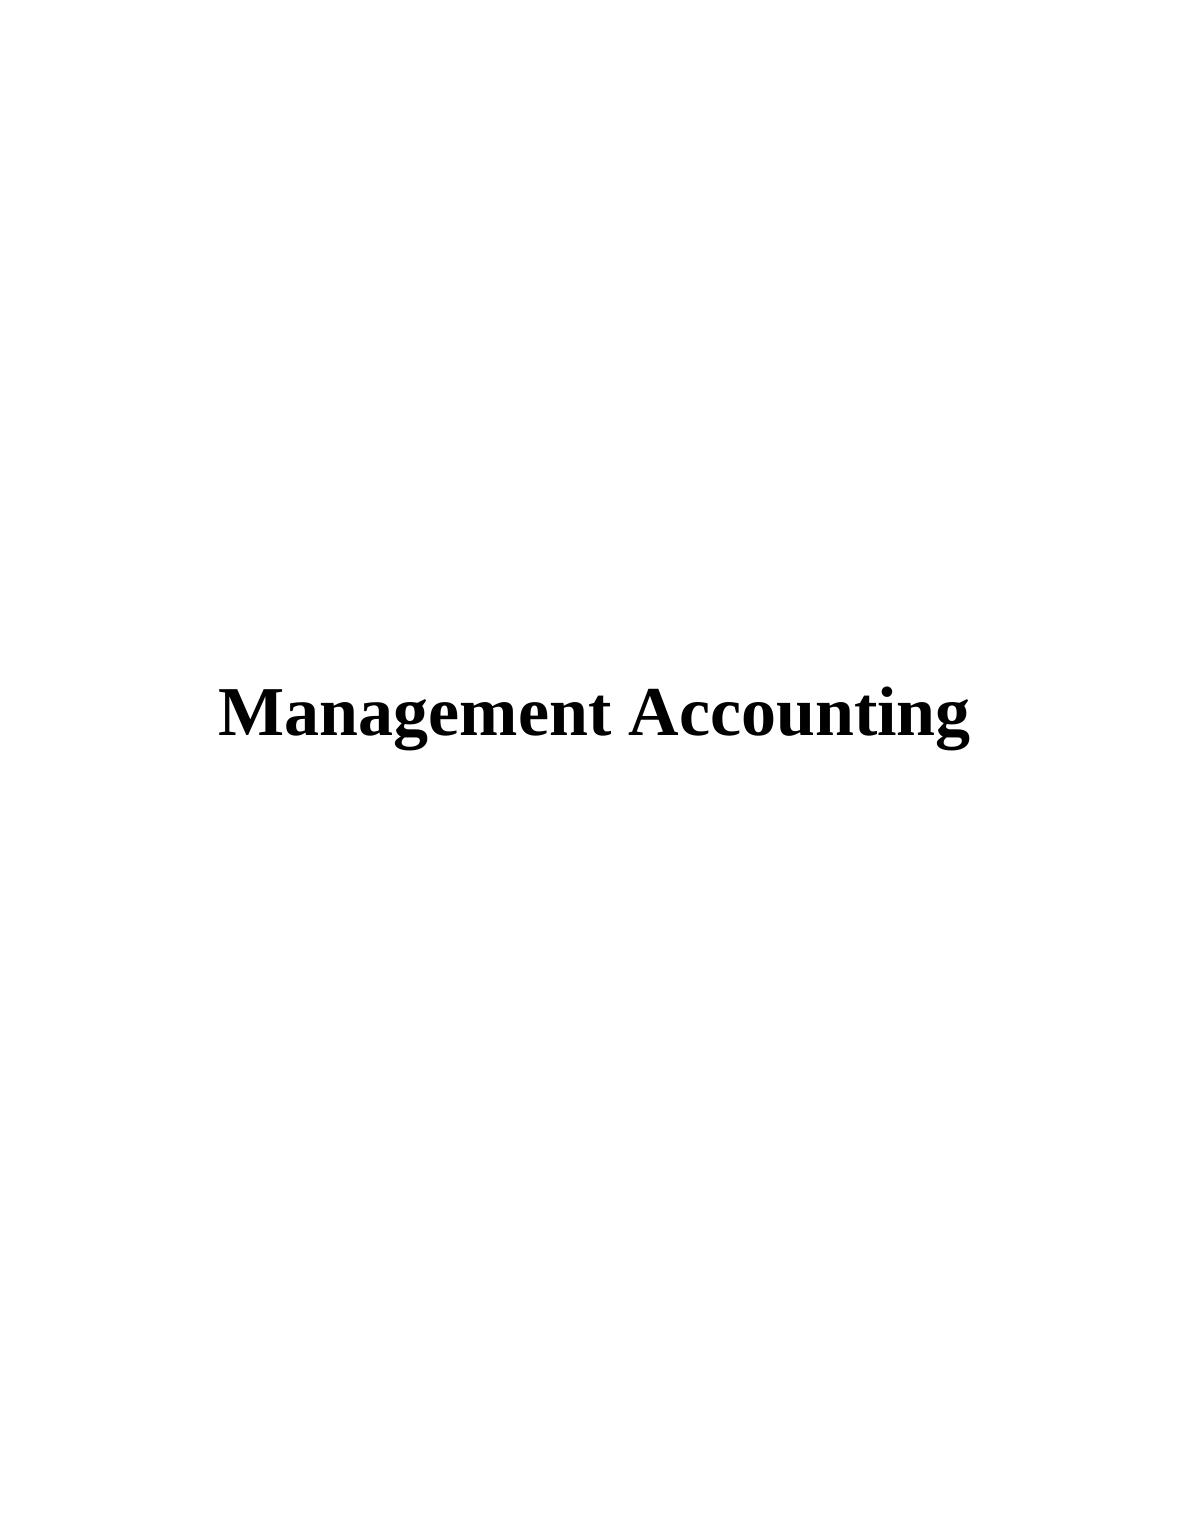 Management Accounting -    Assignment Sample_1